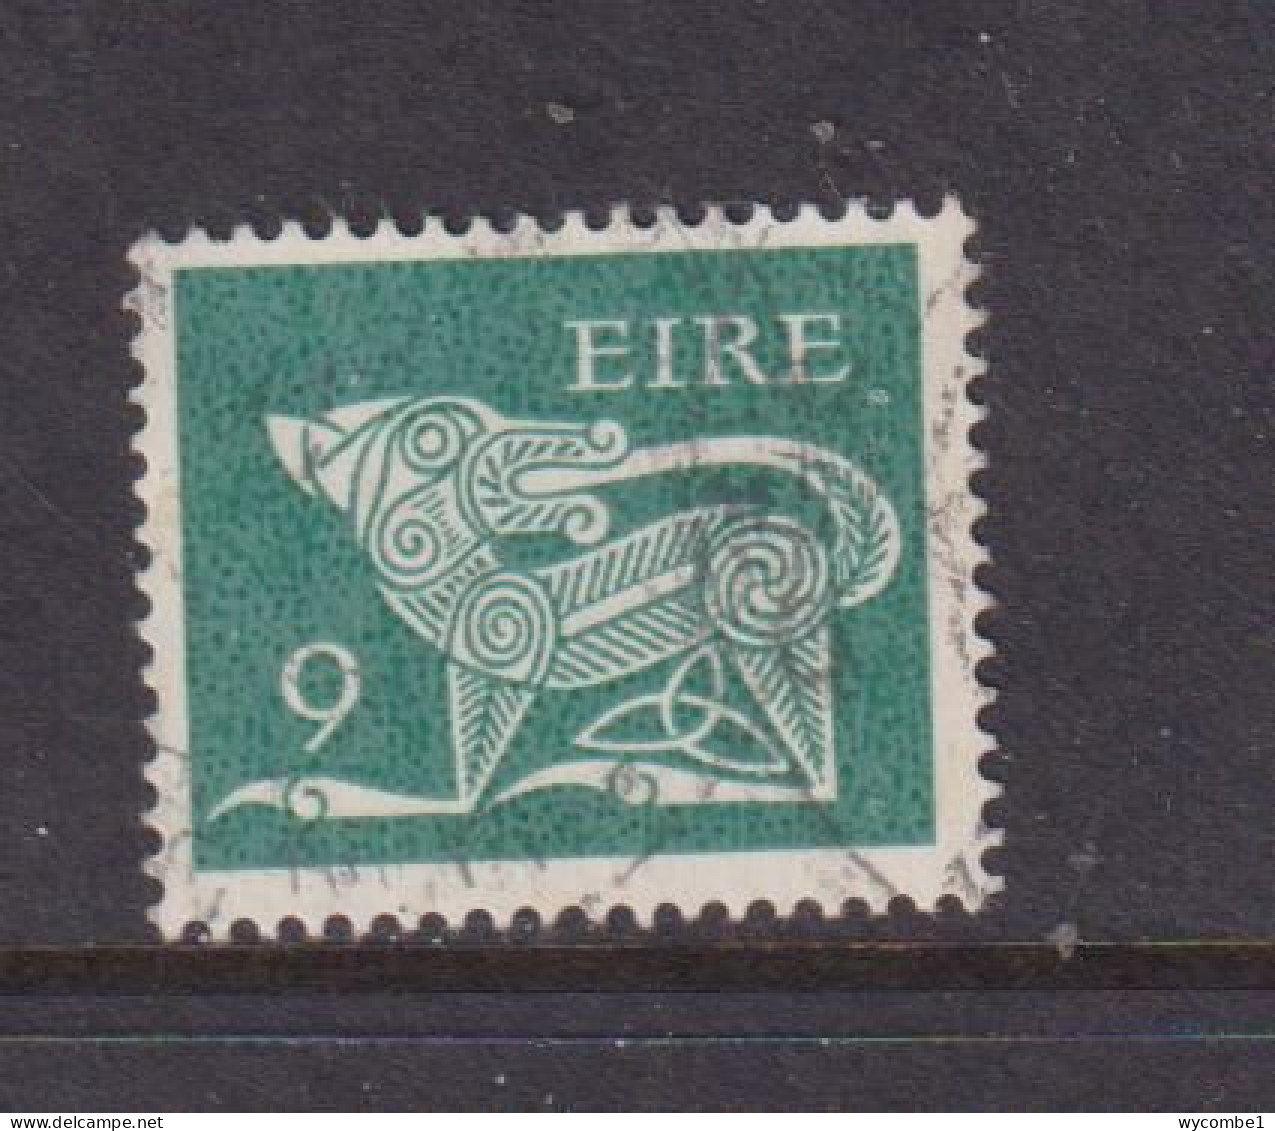 IRELAND - 1971  Decimal Currency Definitives  9p  Used As Scan - Usati